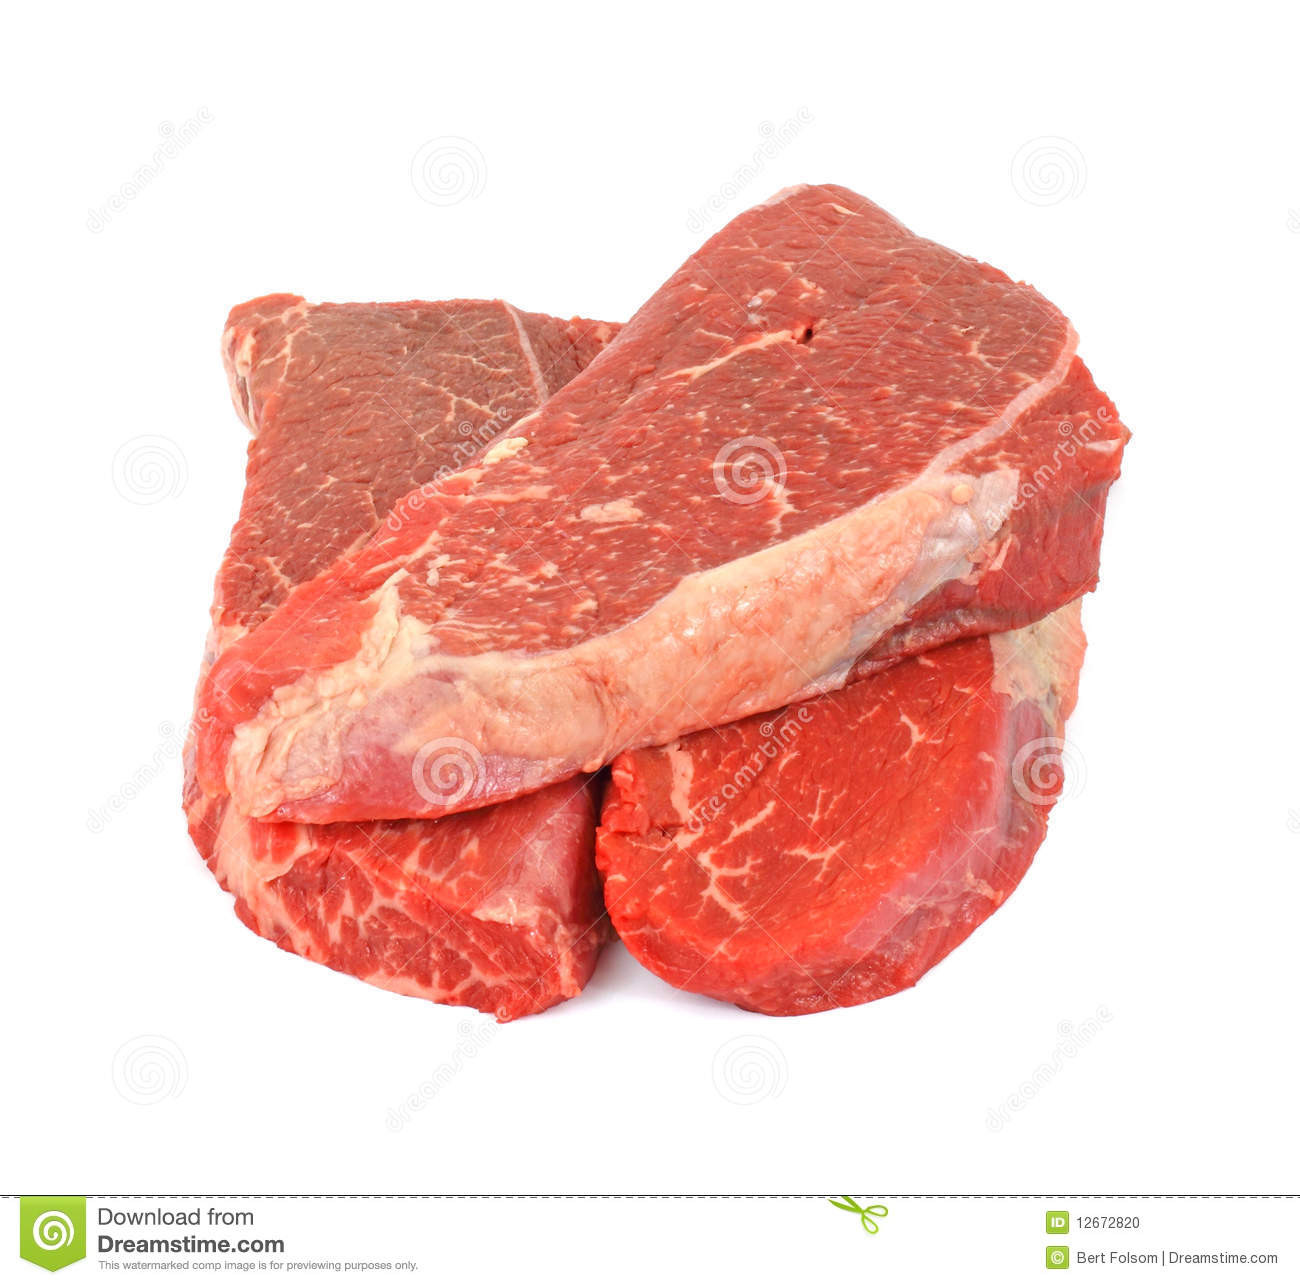 Beef Chuck Shoulder Steak
 Beef chuck shoulder steaks stock photo Image of lean